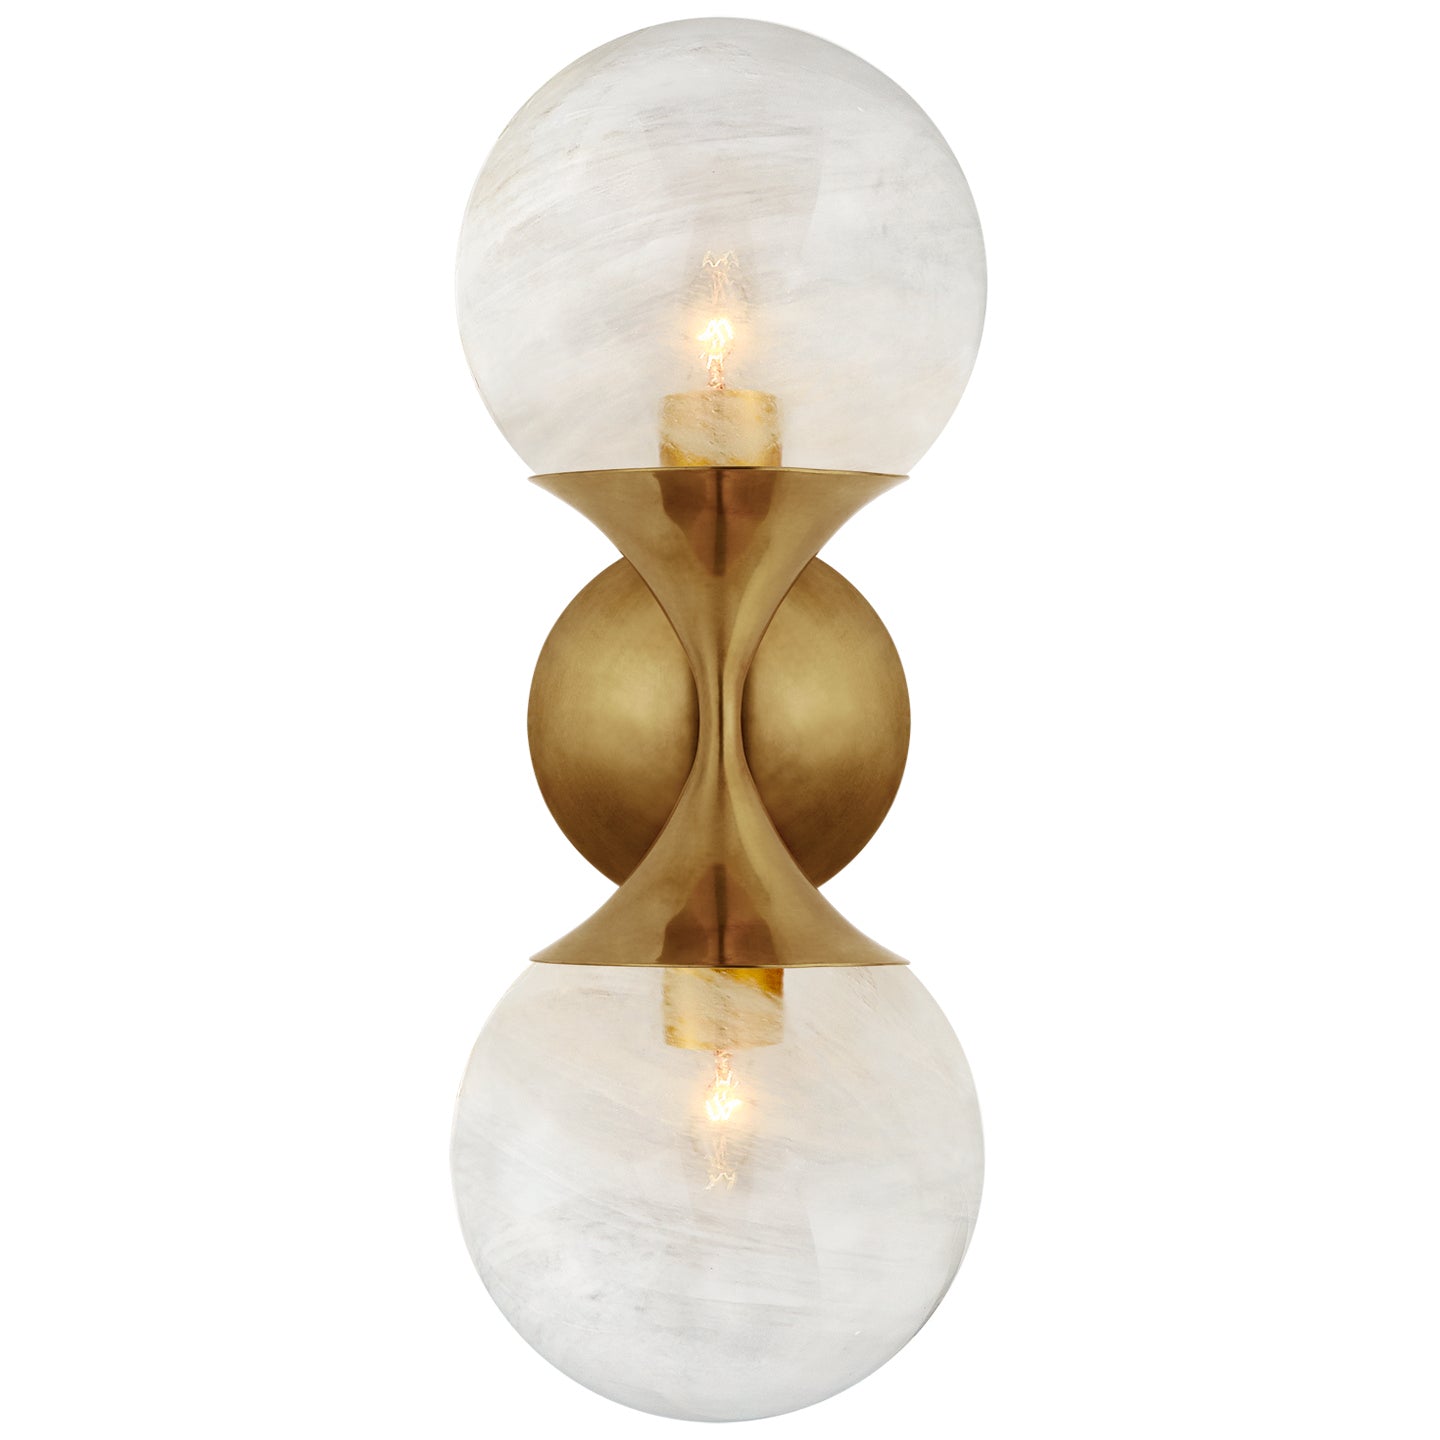 Visual Comfort Signature Canada - Two Light Wall Sconce - Cristol - Hand-Rubbed Antique Brass- Union Lighting Luminaires Decor